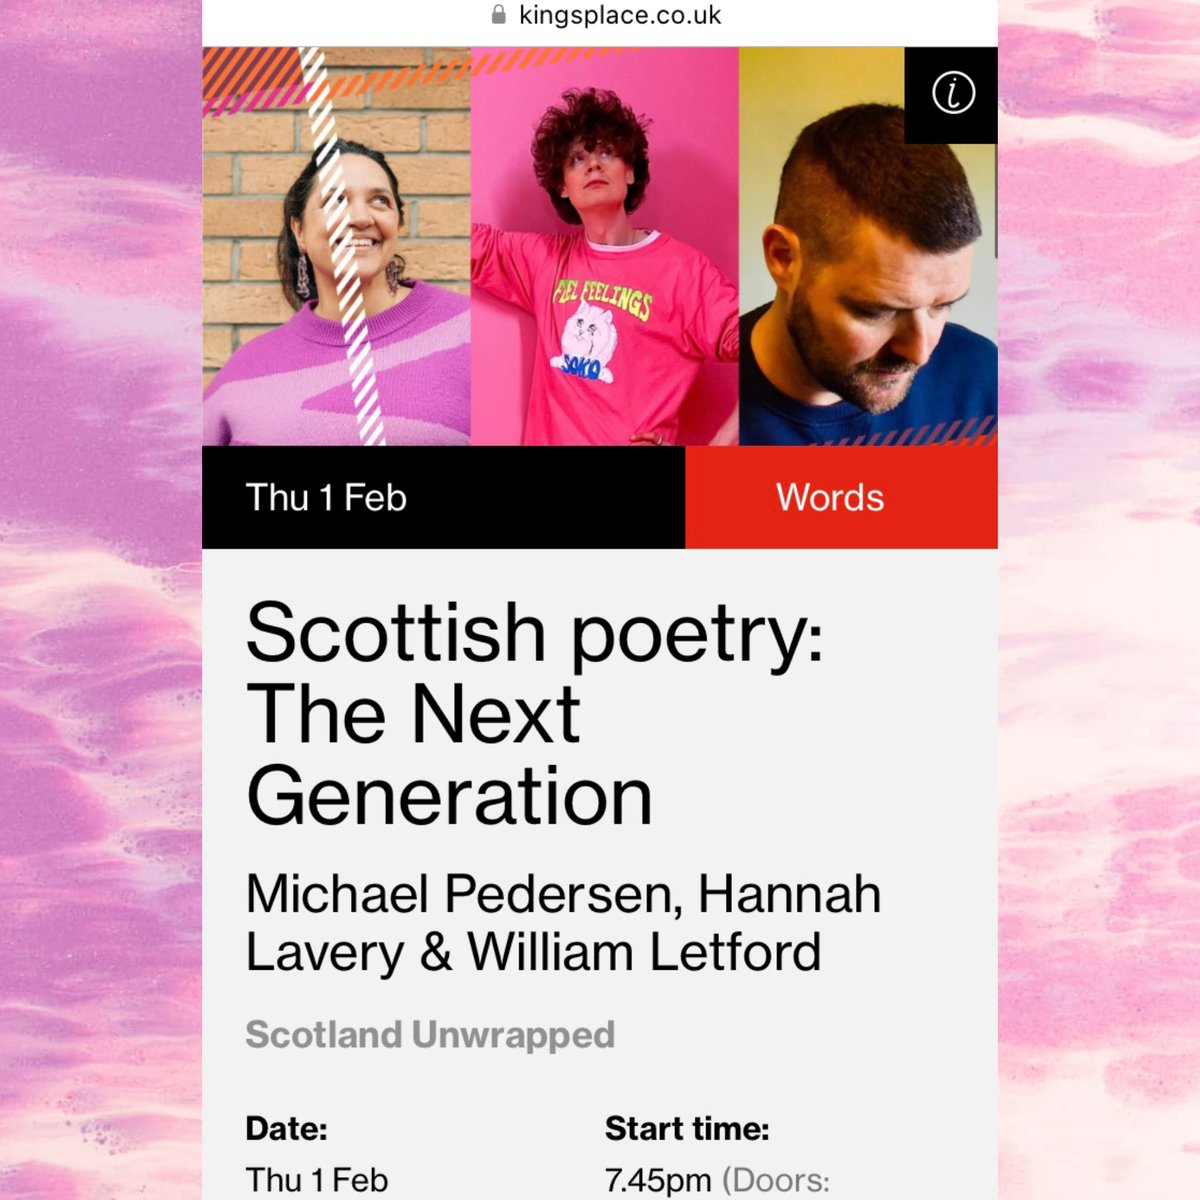 LONDON, 01/02: we’re bringing this Scottish ensemble to @KingsPlace for Scotland Unwrapped; an event curated by the wonder @JackieKayPoet. That’s me, @HanLavery & @BillyLetford with @juliamarybird hosting. Pls send friends, fiends & lovers our way 🩵. 🎟️ michaelpedersen.co.uk/events